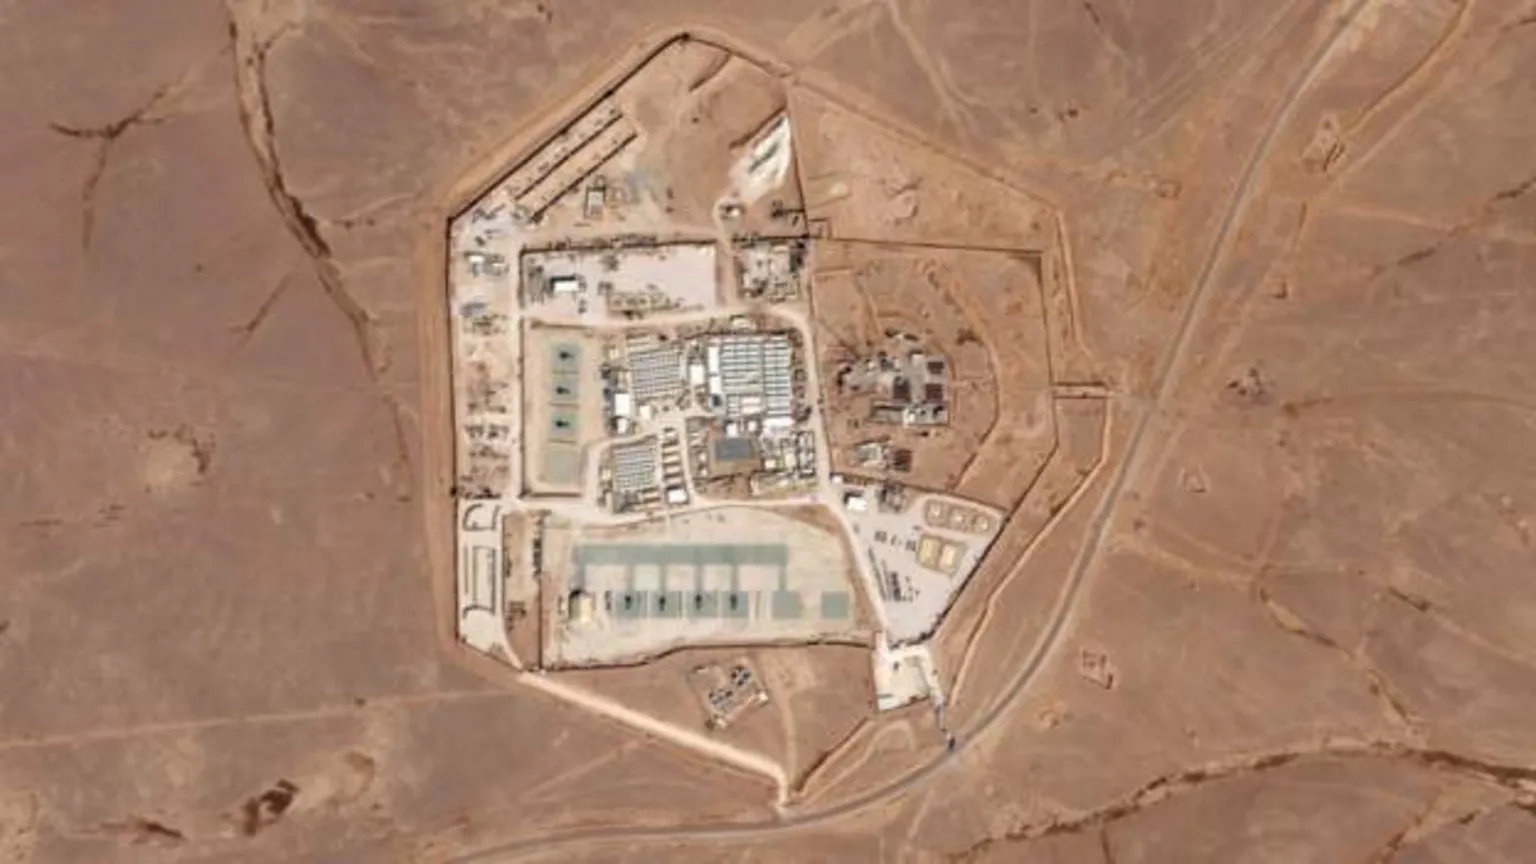 The attack targeted Tower 22, a US base in Jordan. (AP)